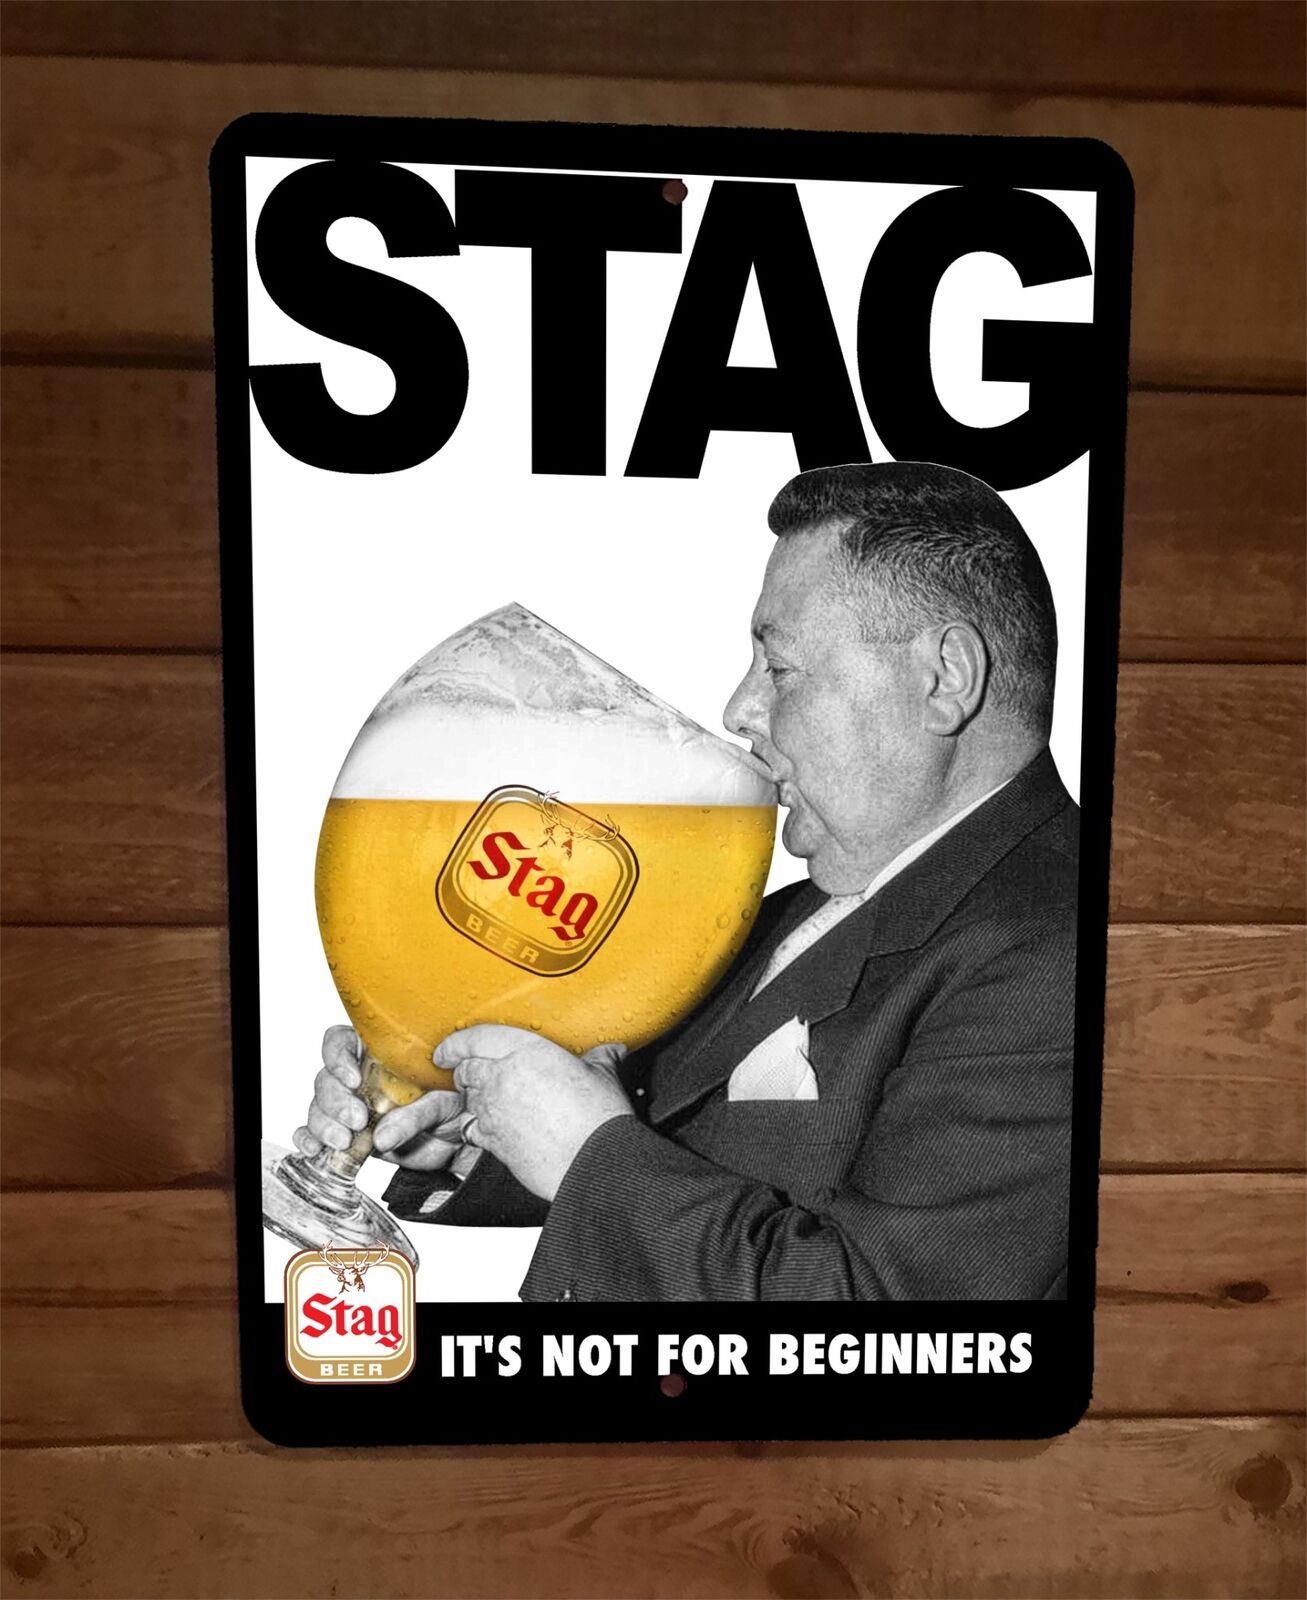 Stag Beer Its Not For Beginners Vintage Ad 8x12 Metal Wall Bar Sign